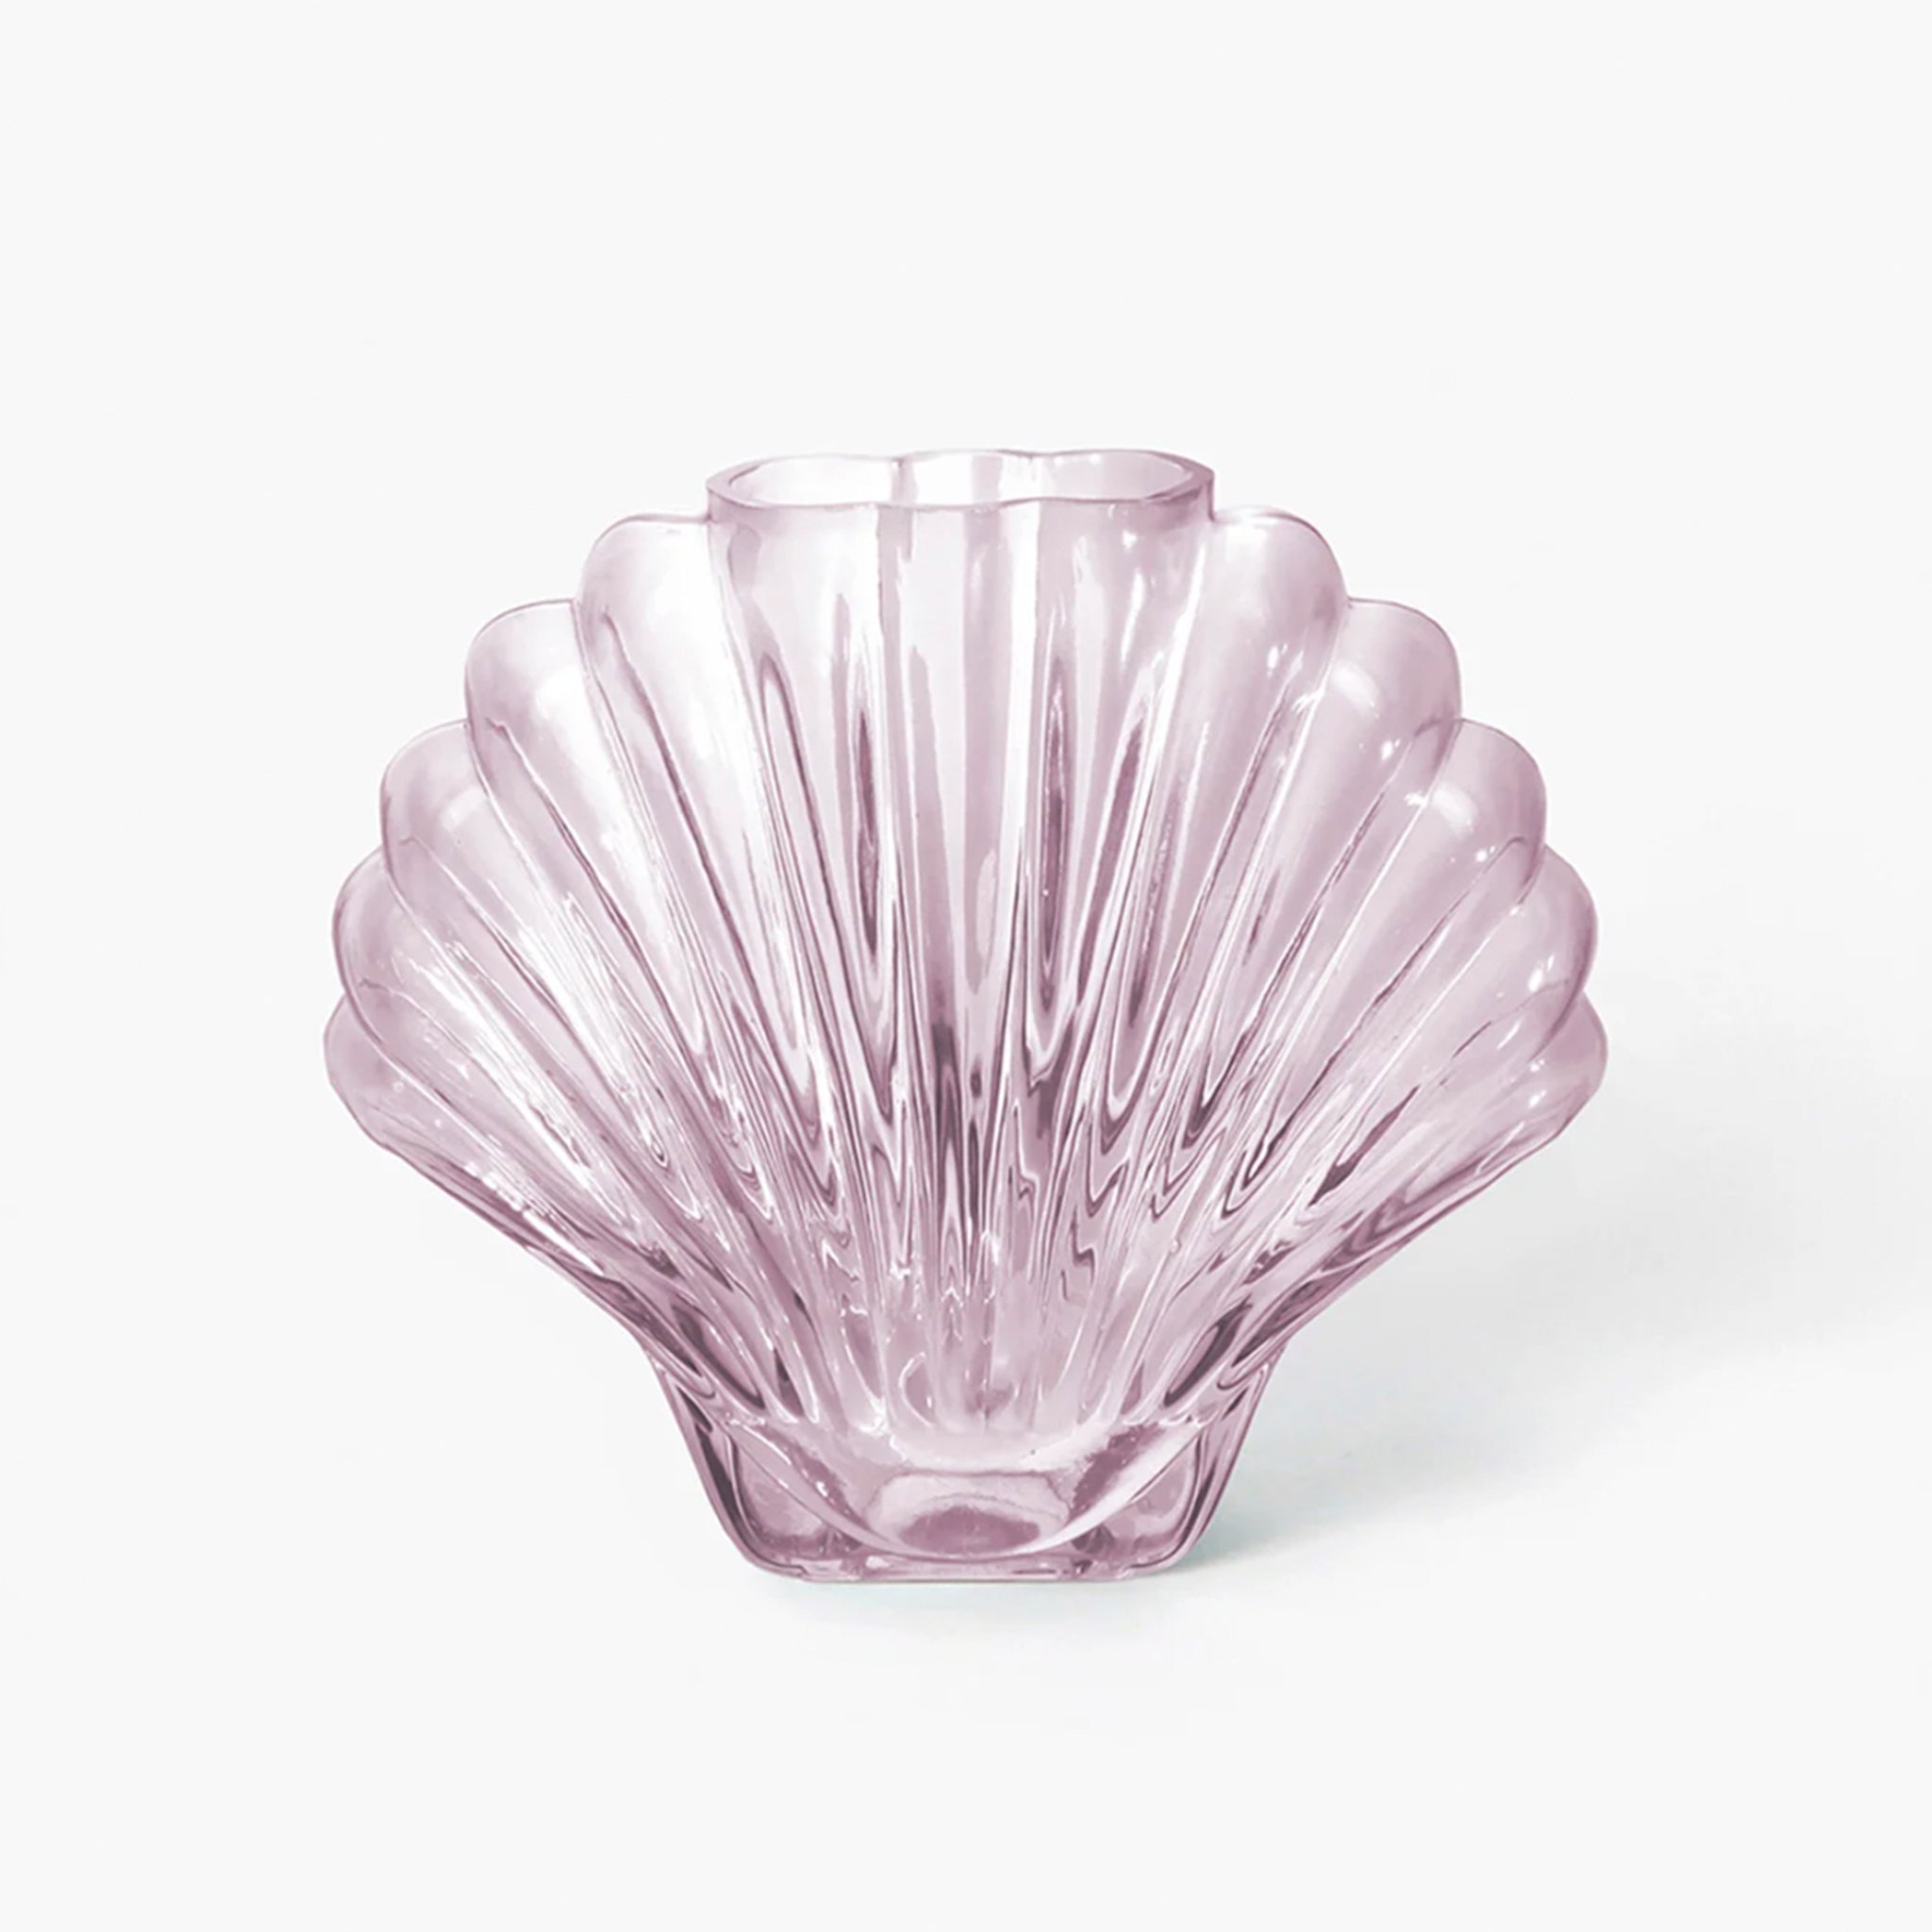 On a white background is a light pink glass, shell shaped vase. 